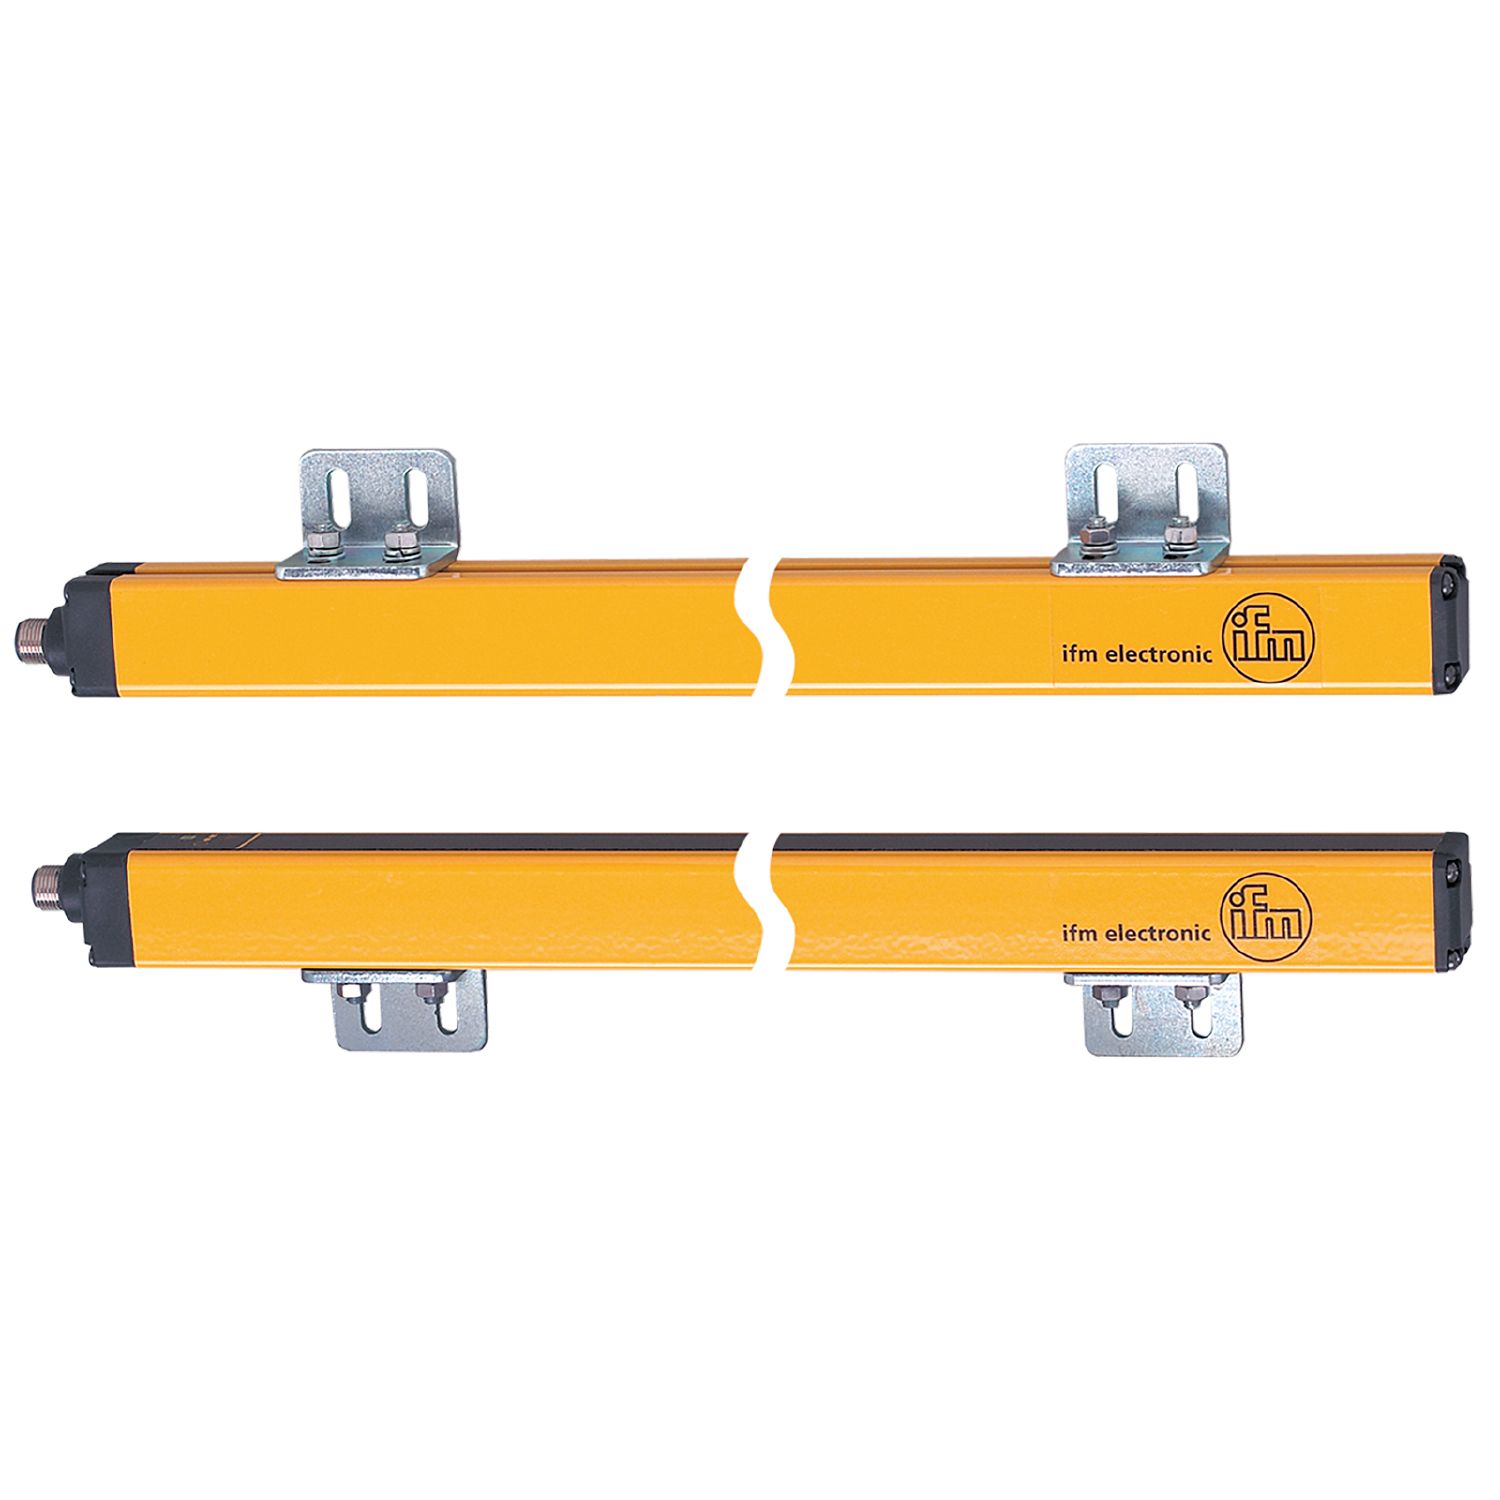 OY047S - Safety light curtain - ifm